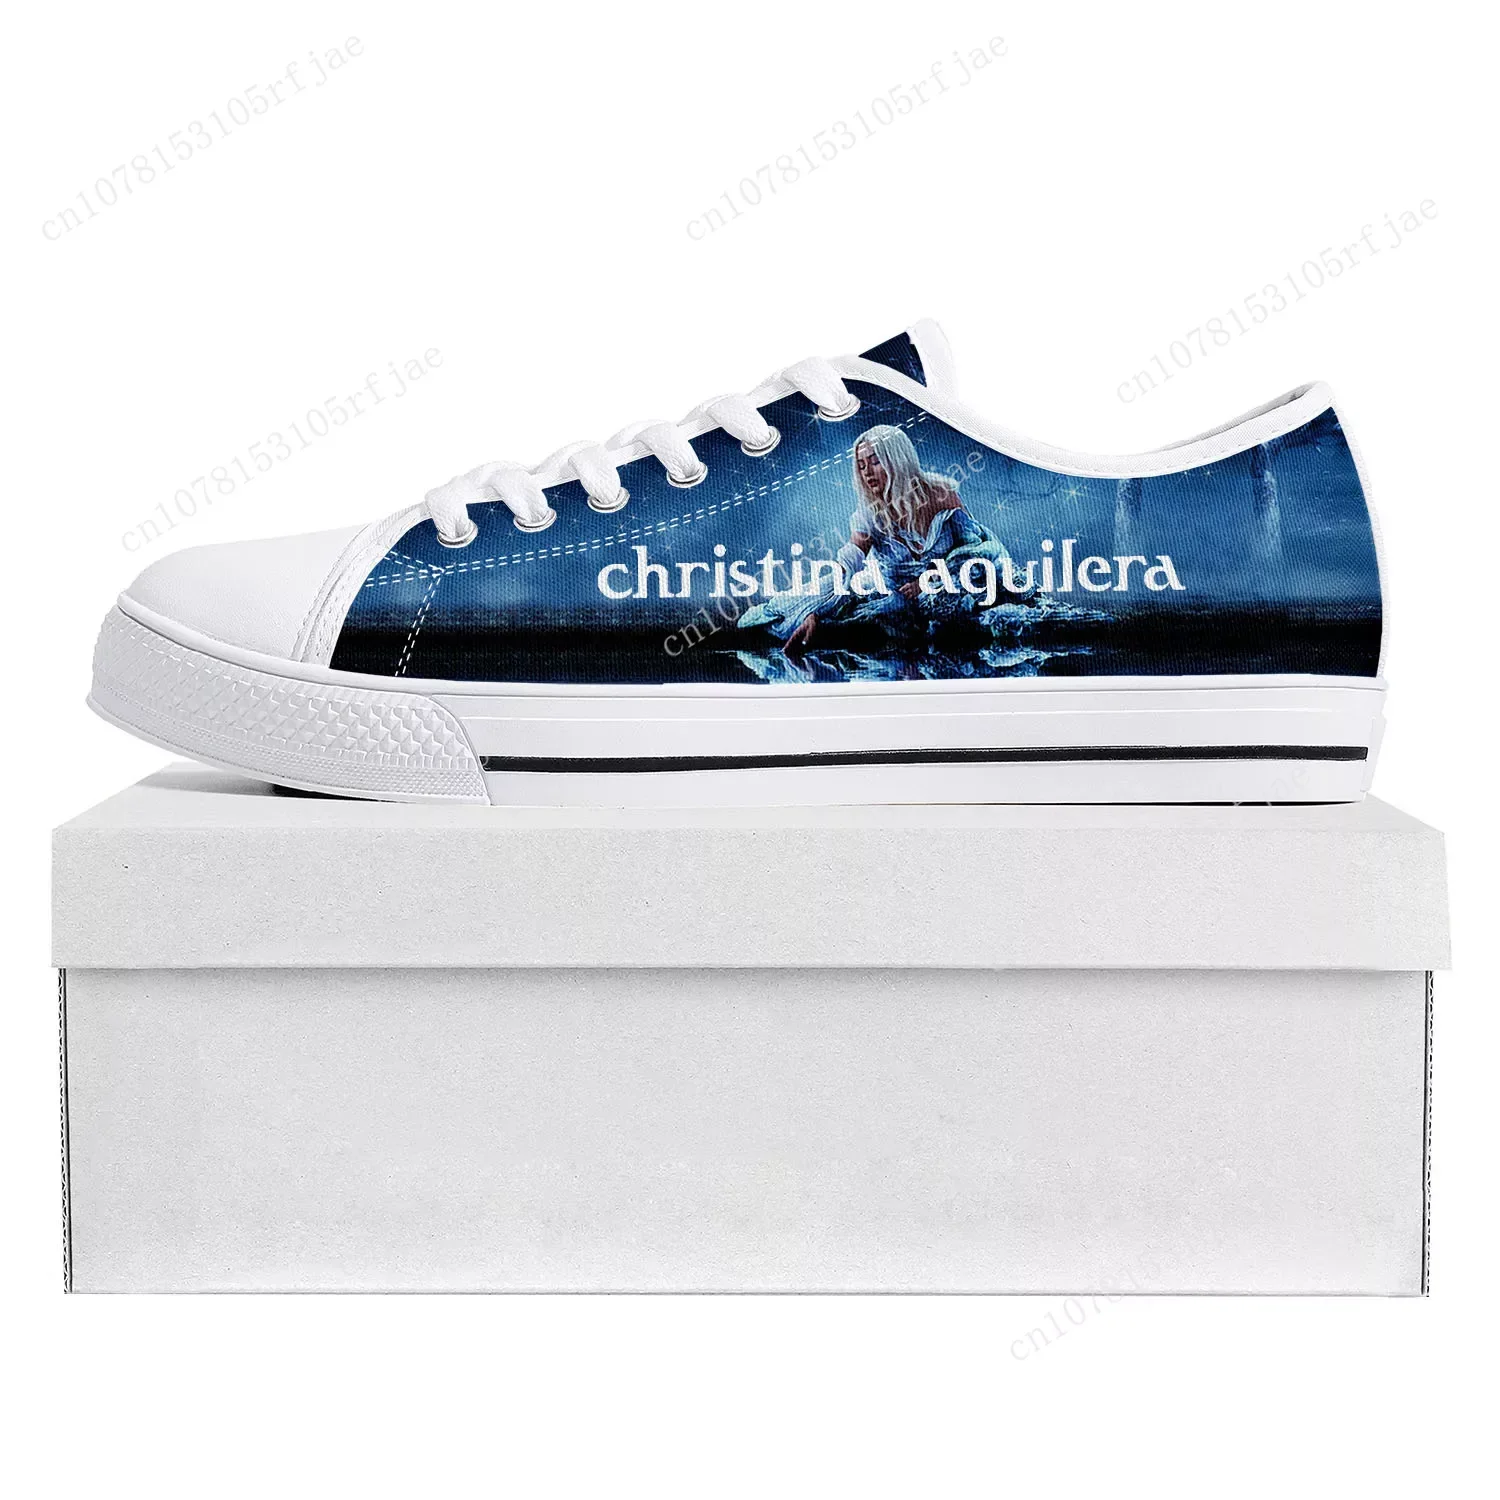 

Christina Aguilera Low Top High Quality Sneakers Mens Womens Teenager Canvas Customized Sneaker Casual Couple Shoes Custom Shoe